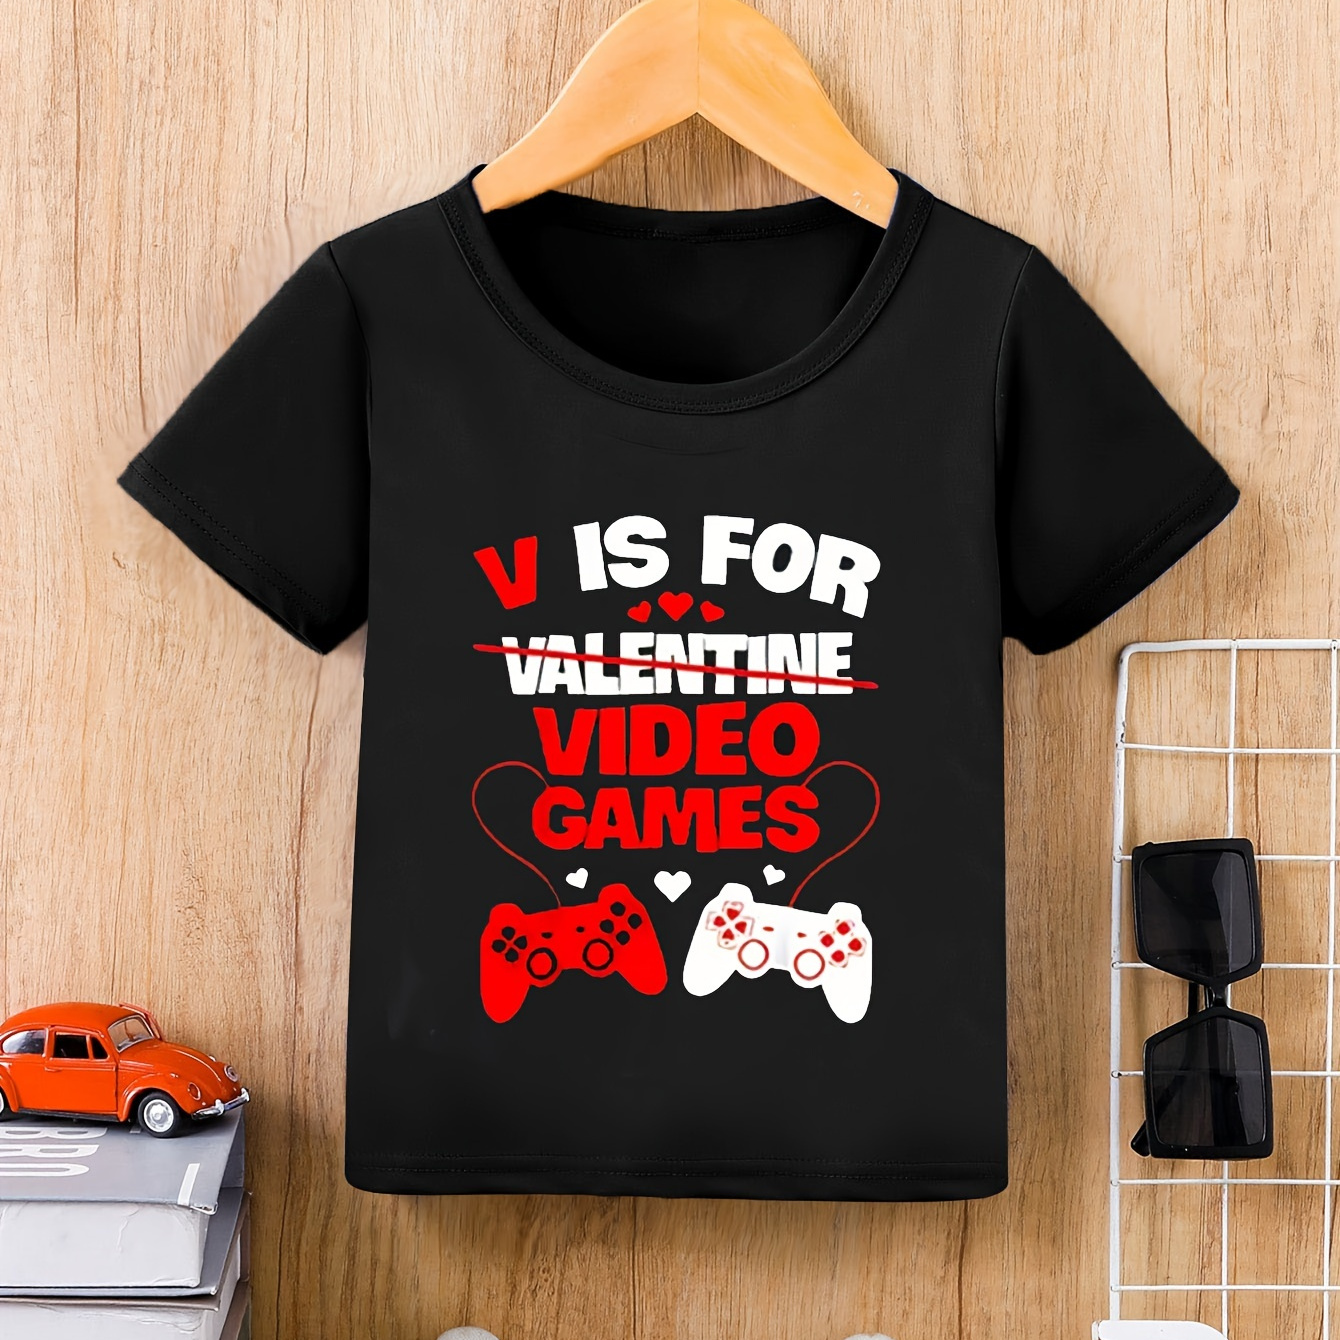 

Boys' Casual T-shirt "v Is For Valentine, Video Games" Graphic Print Boys Comfortable Versatile Short Sleeve T-shirt Boys Tee Tops